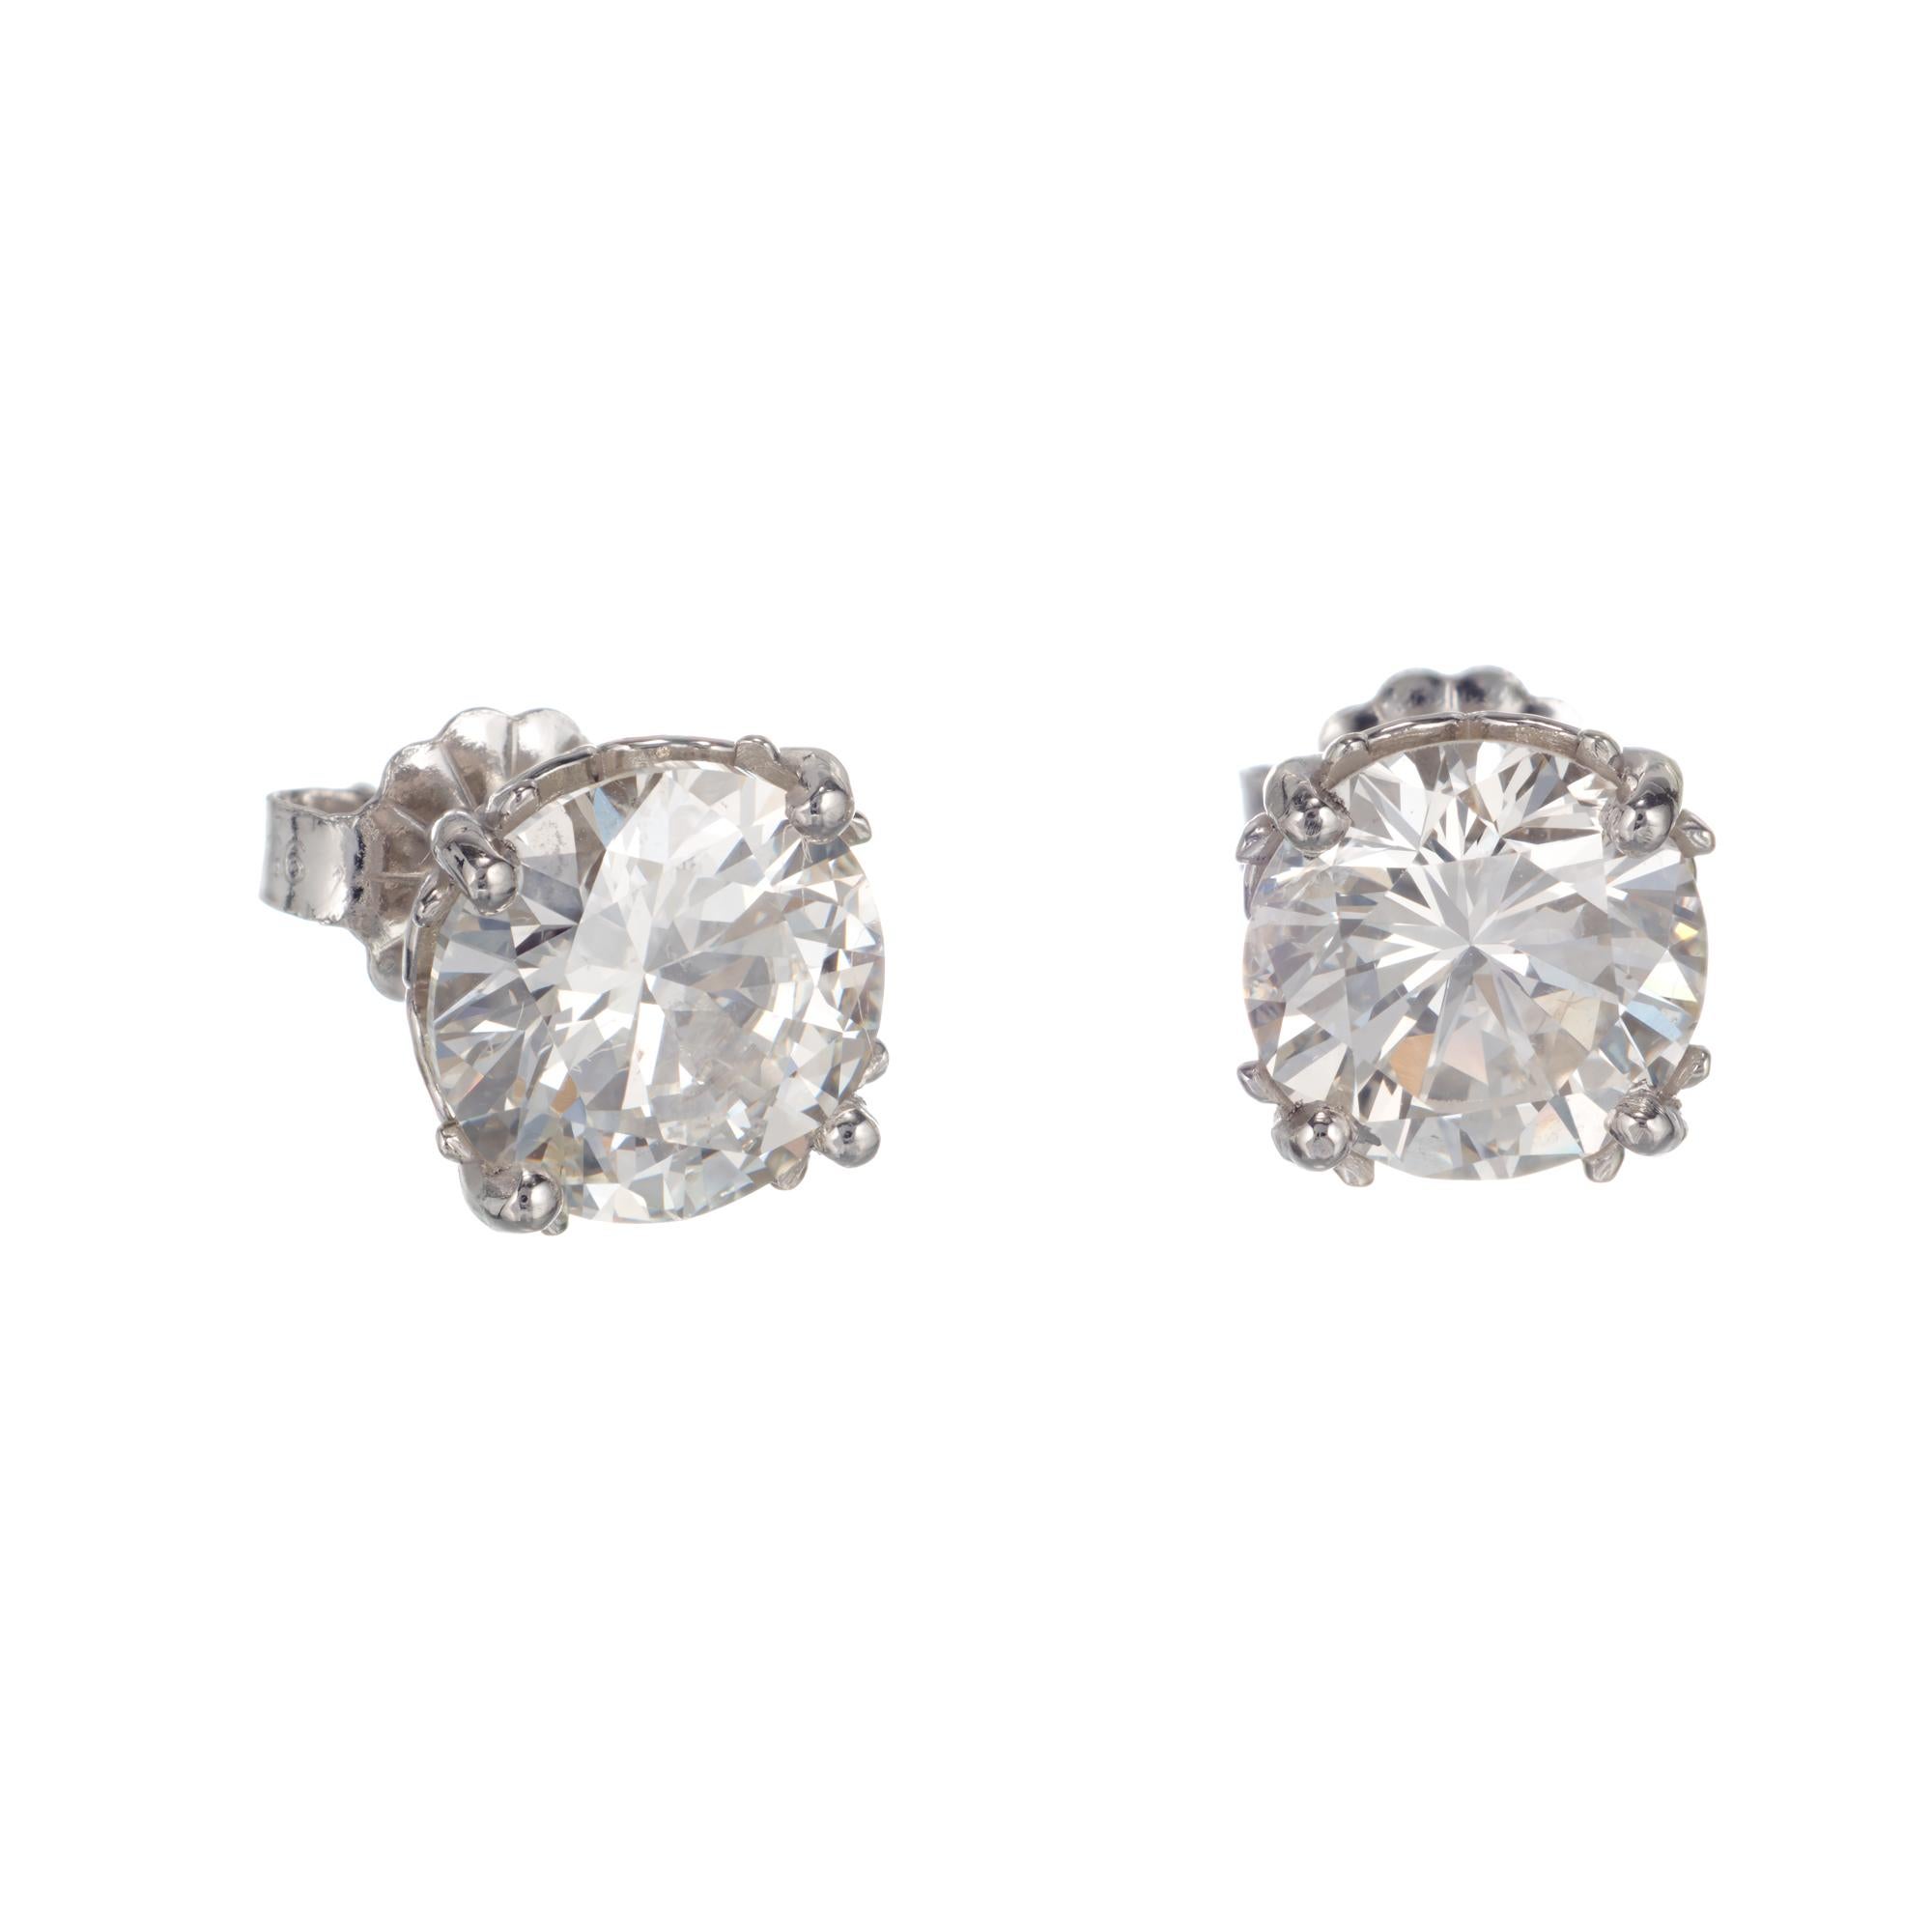 3.00 carat round brilliant cut diamond stud earrings. Set in platinum open work scroll baskets from the Peter Suchy Workshop

1 round brilliant cut K SI2 diamonds, Approximate 1.50cts GIA Certificate # 5171342072
1 round brilliant cut J I diamonds,